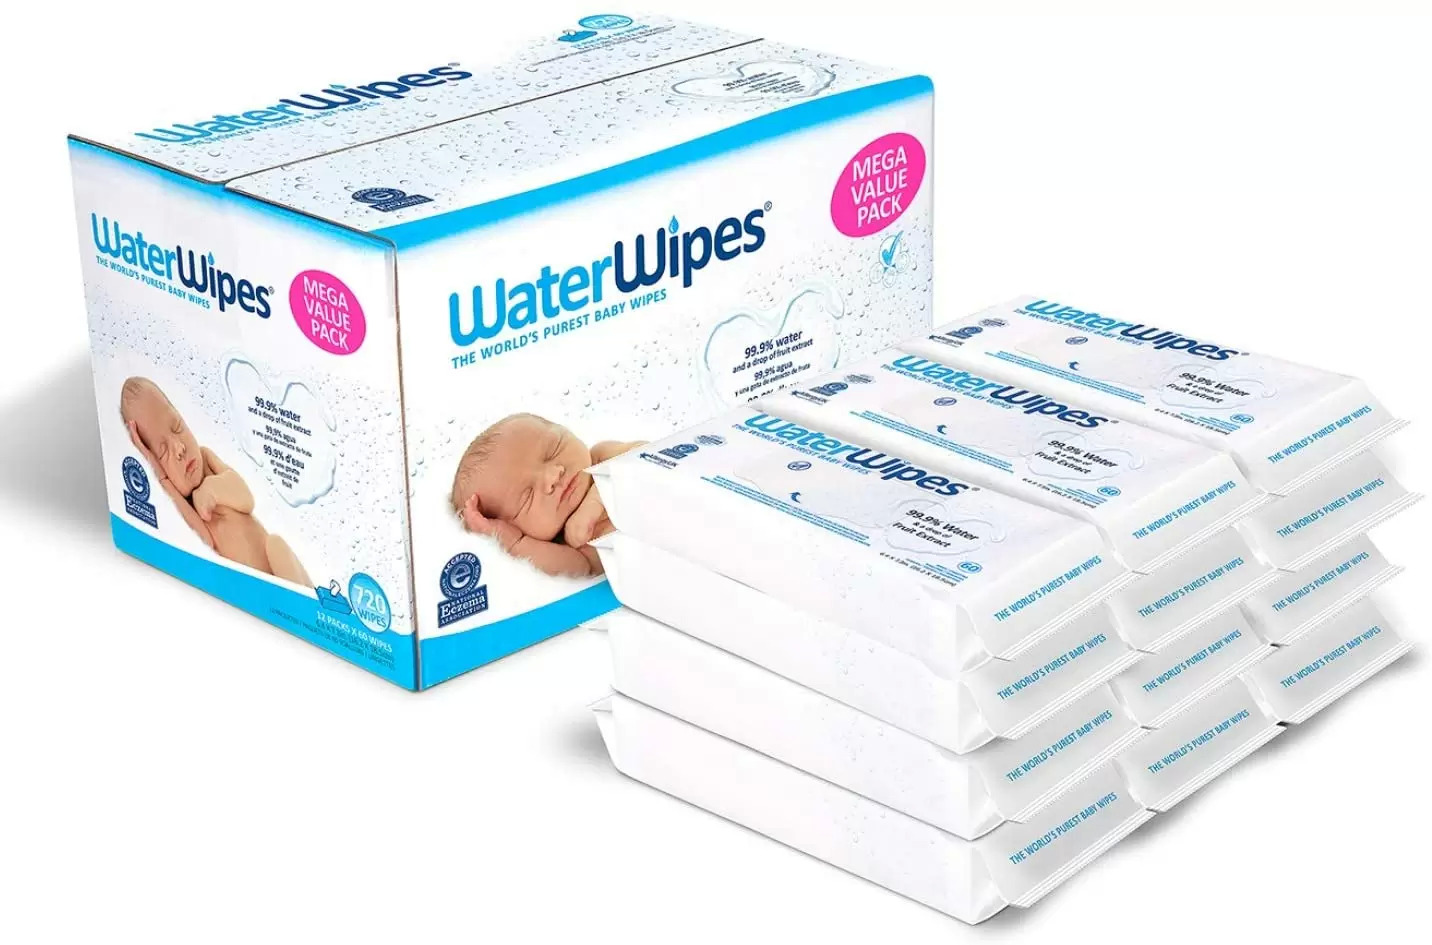 WaterWipes Original Baby Wipes, 99.9% Water, Unscented & Hypoallergenic for Sensitive Newborn Skin, 12 Packs (720 Count) $32.67